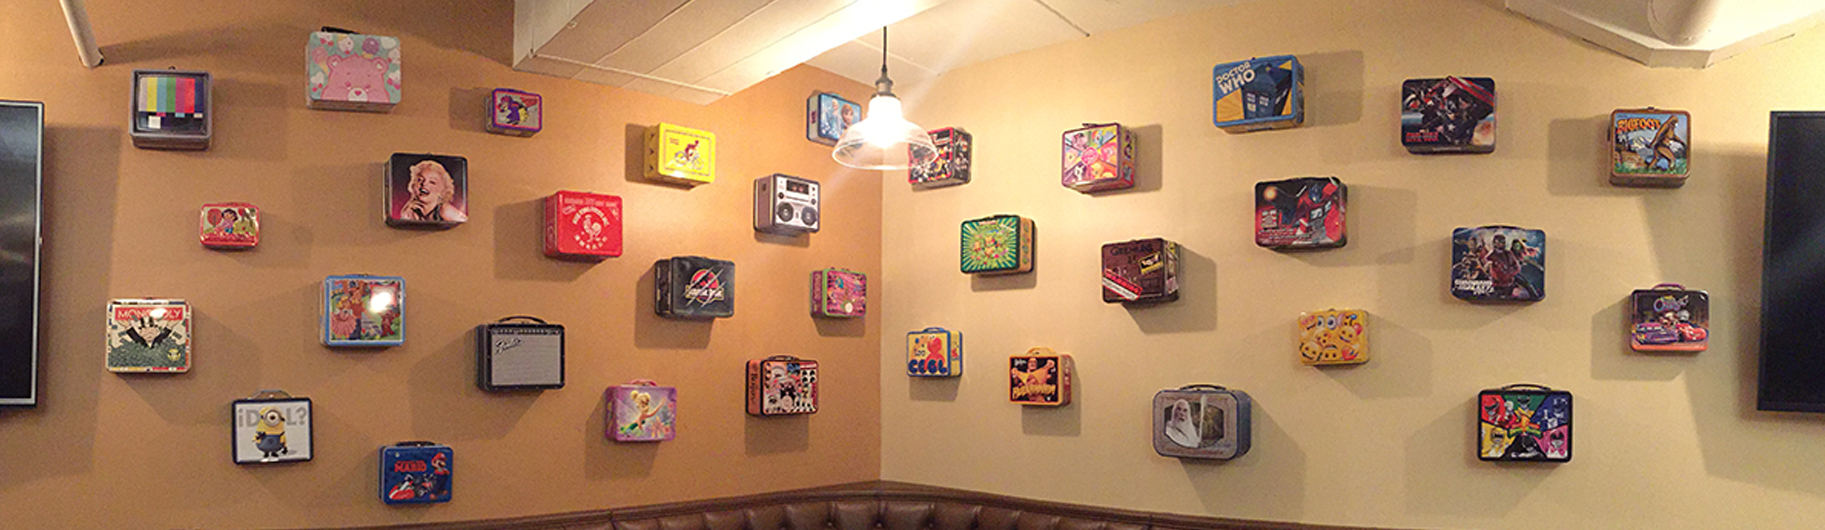 photo of lunch boxes on walls